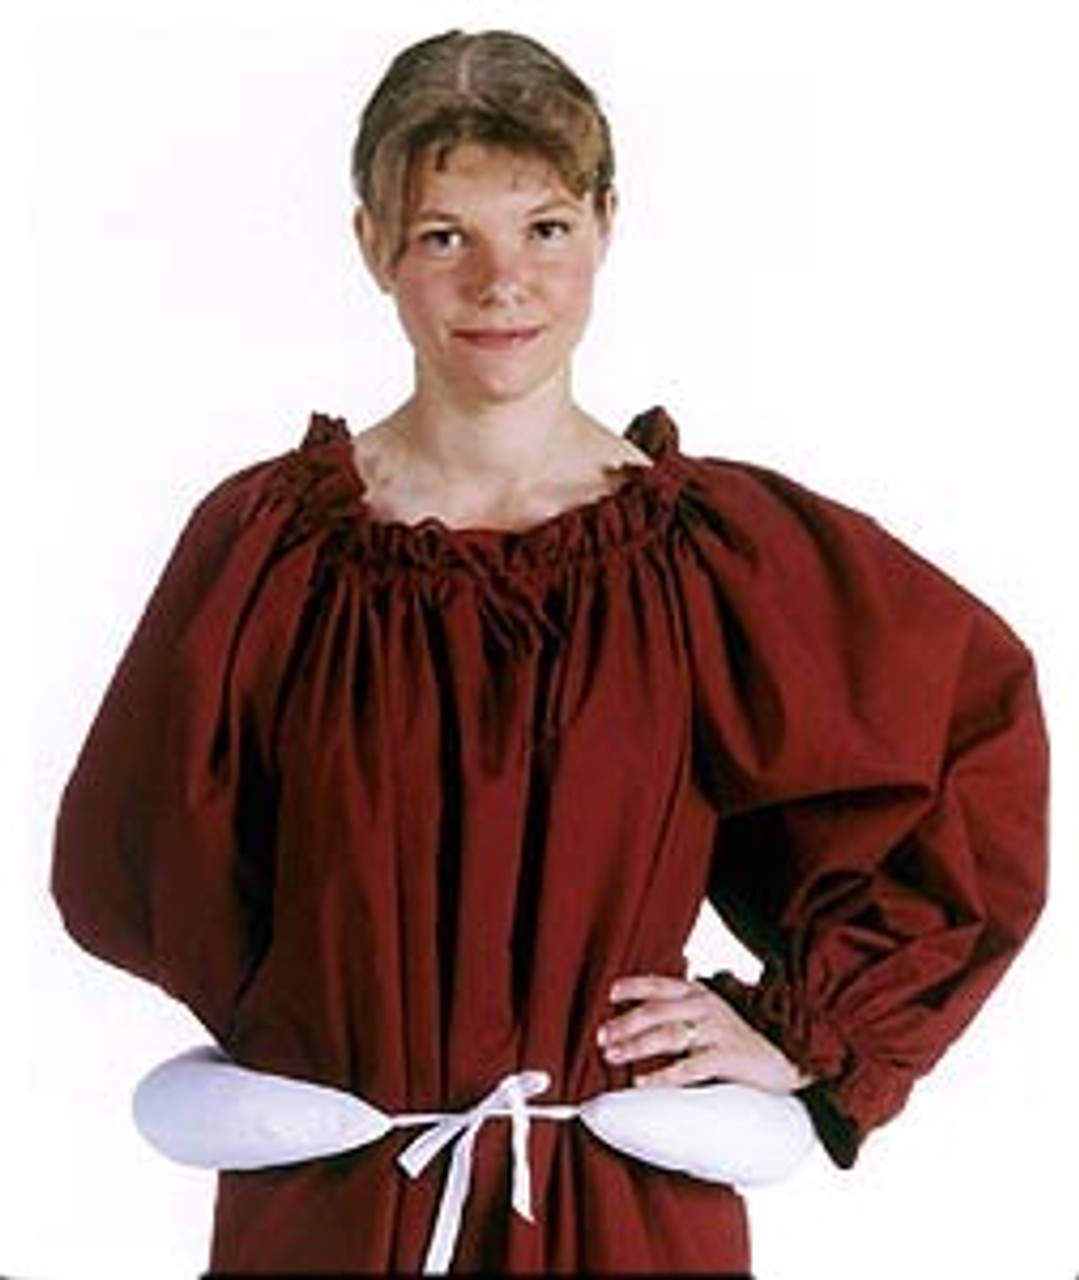 Medieval Chemise for Women, Long Shirt, Medieval Underwear, 14th Century  Chemise -  Canada